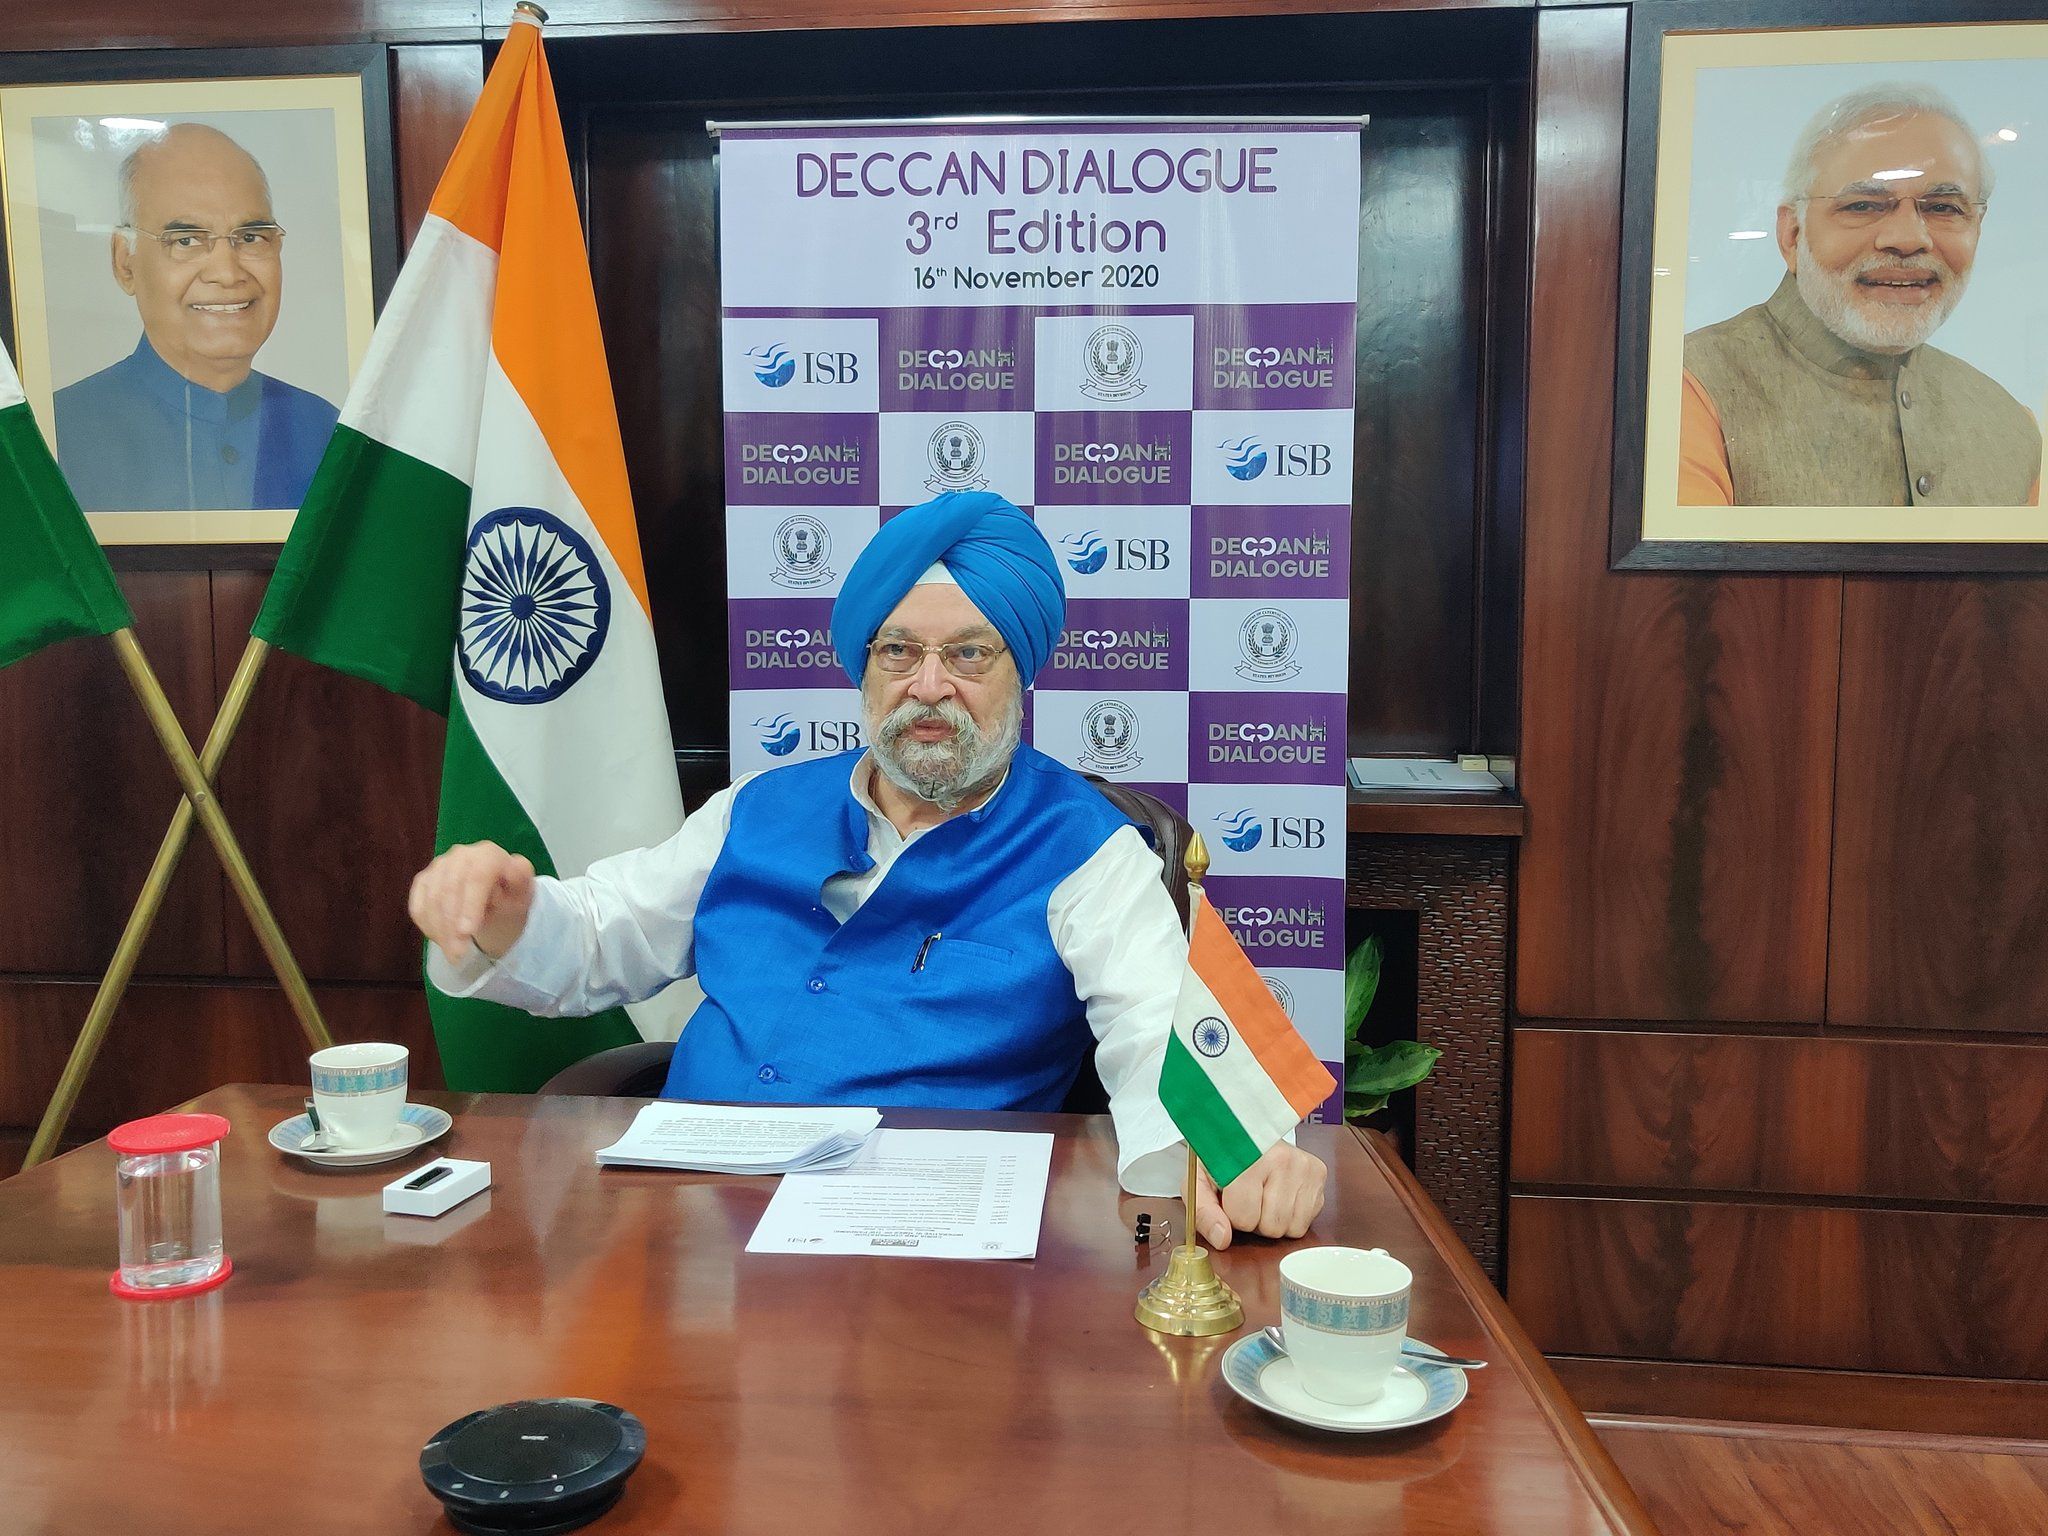 Air travel to restore pre-COVID level by the end of 2020: Hardeep Singh Puri